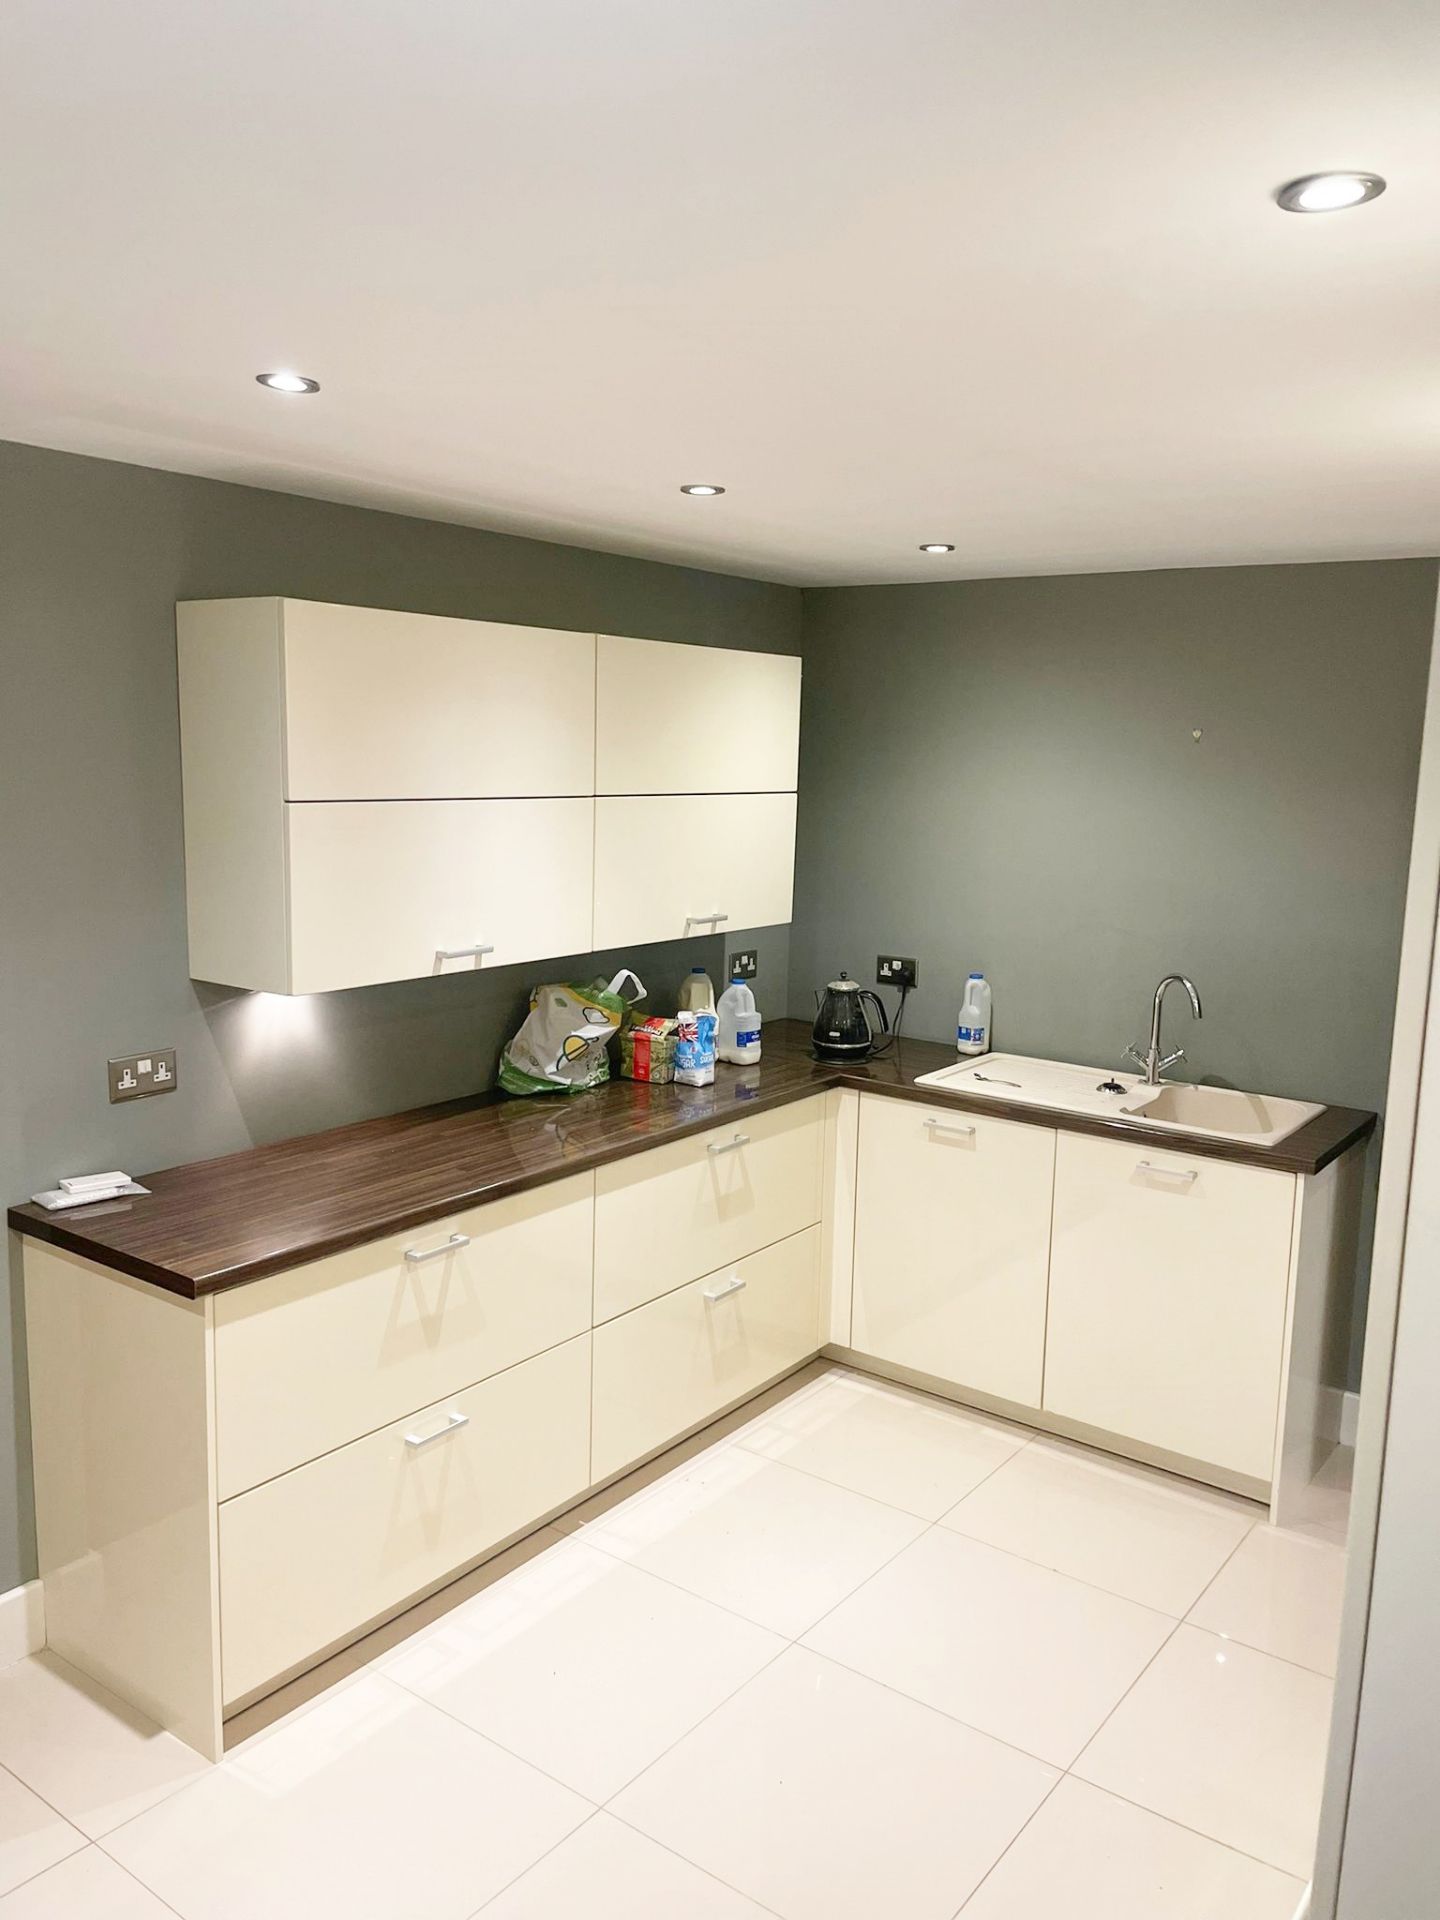 1 x Contemporary ALNO Fitted Kitchen With Branded  Appliances Created By Award Winning Kitchen - Image 85 of 89